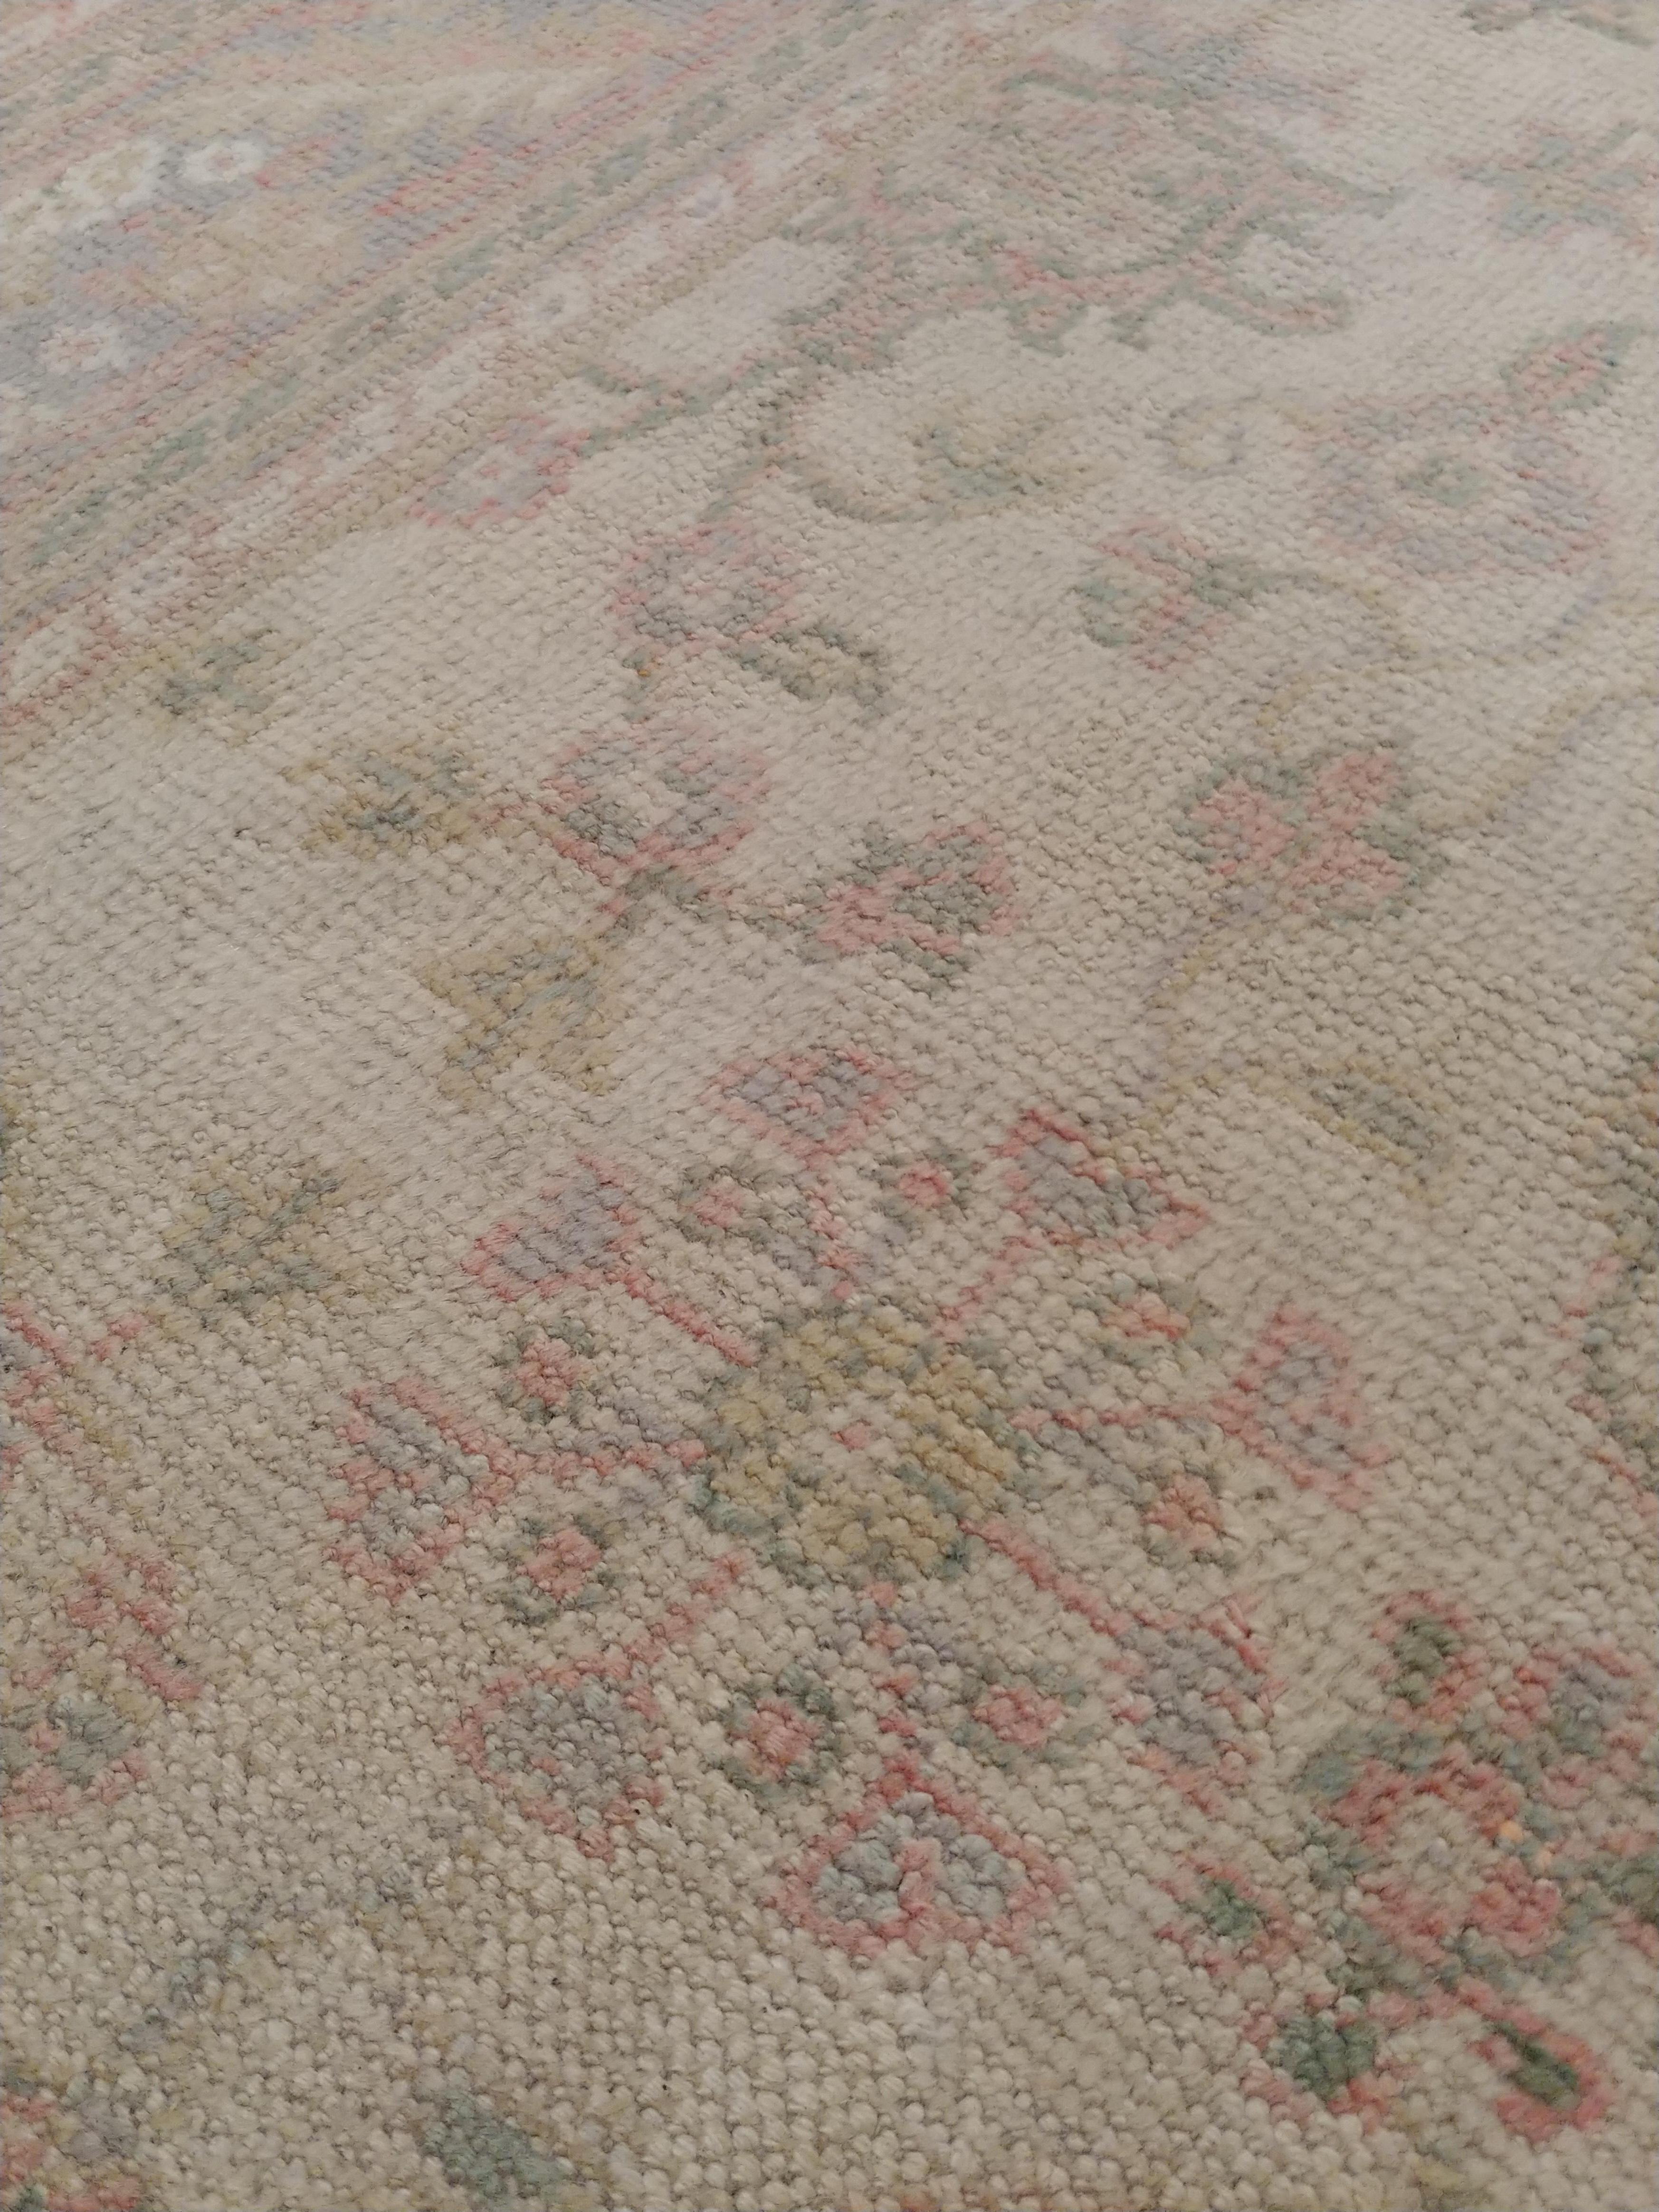 Antique Oushak Carpet, Handmade Turkish Oriental Rug, Beige, Taupe, Soft In Excellent Condition For Sale In Port Washington, NY